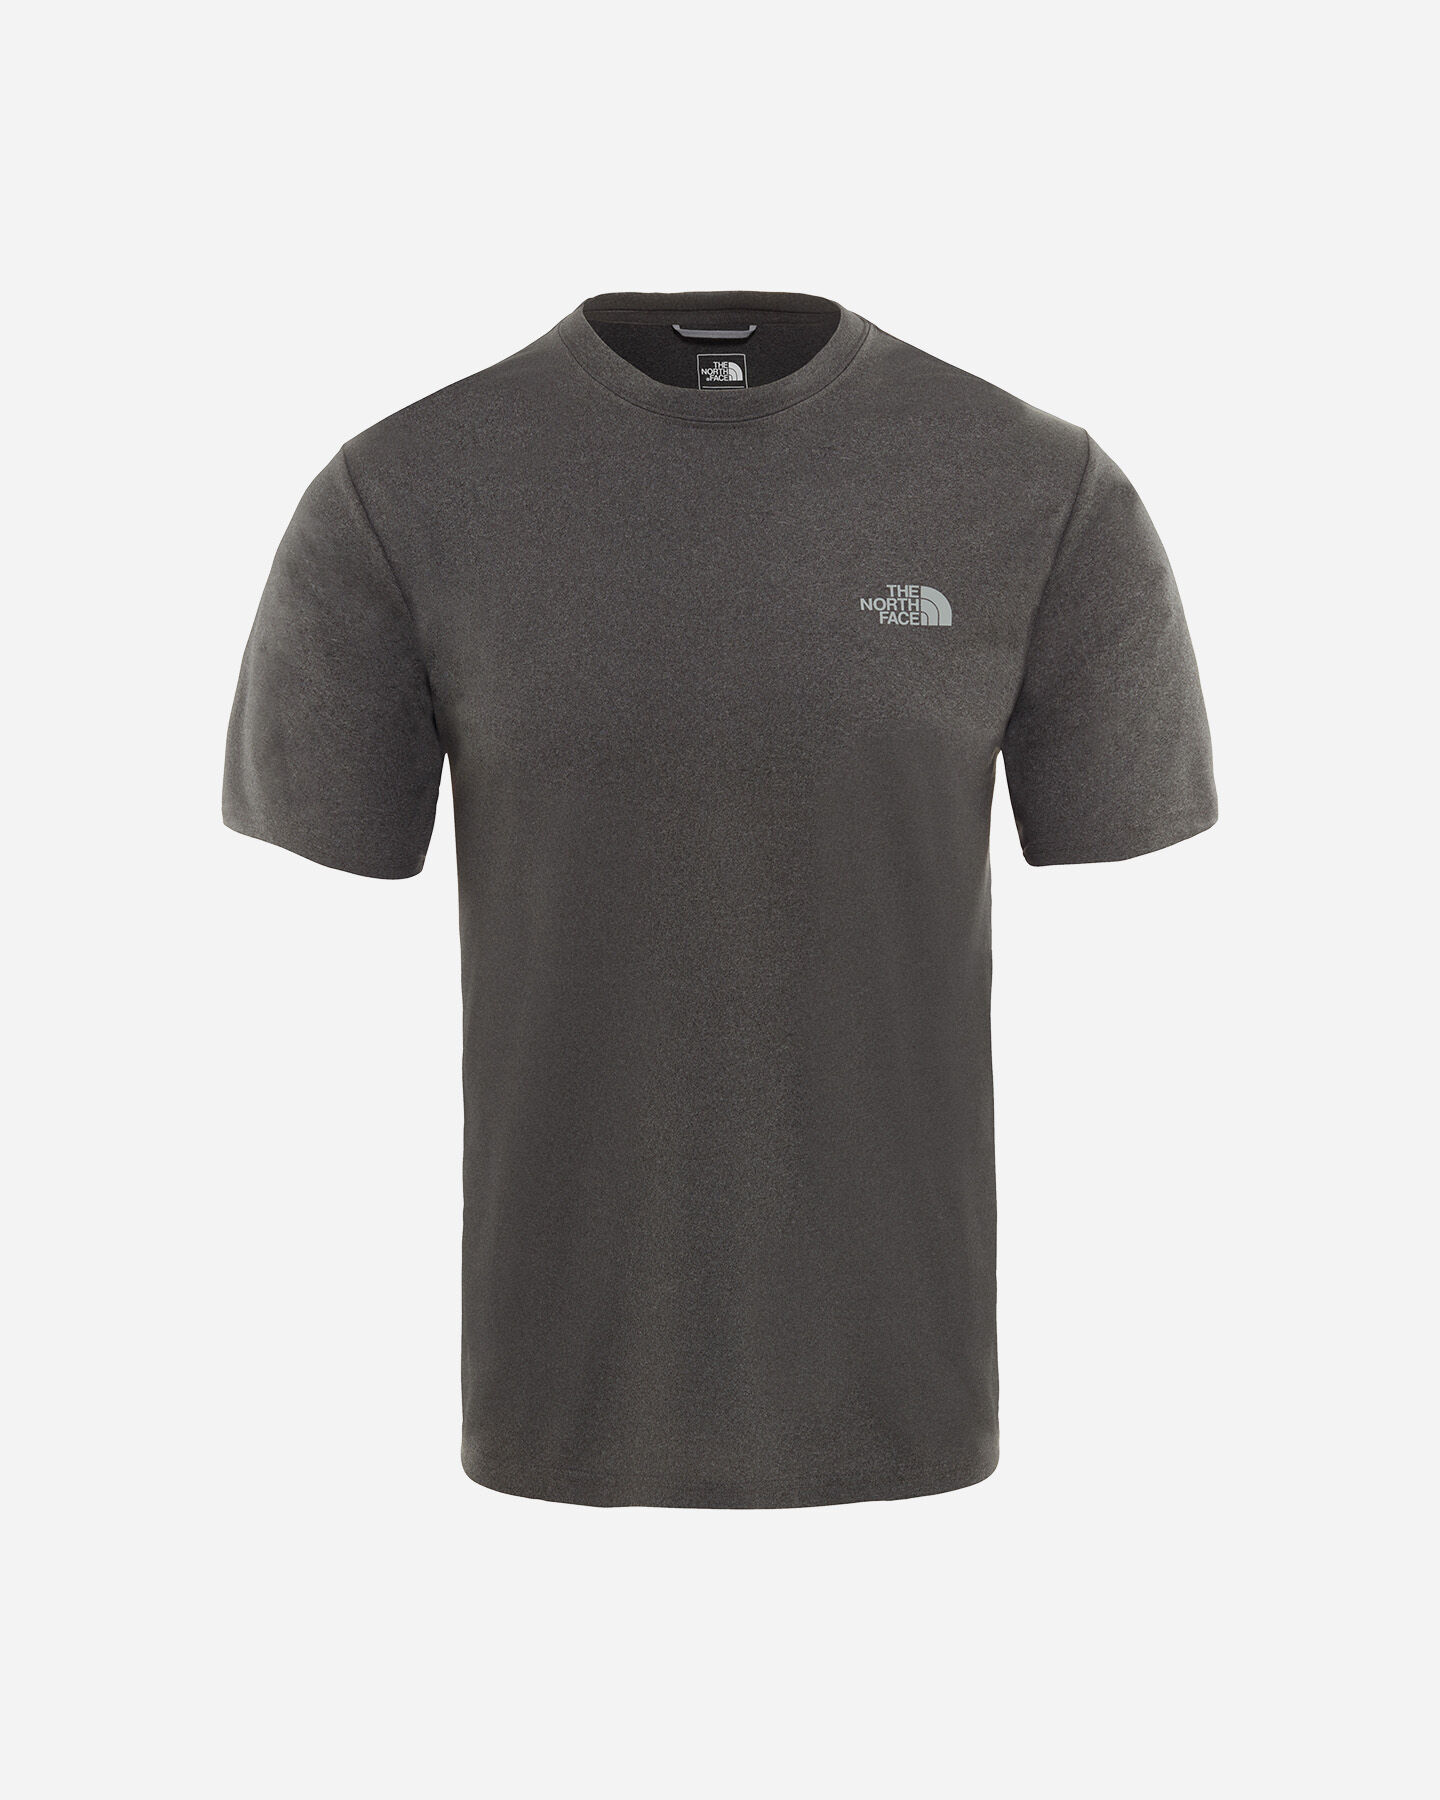  T-Shirt THE NORTH FACE REAXION AMP M S5017213|DYZ|XS scatto 0